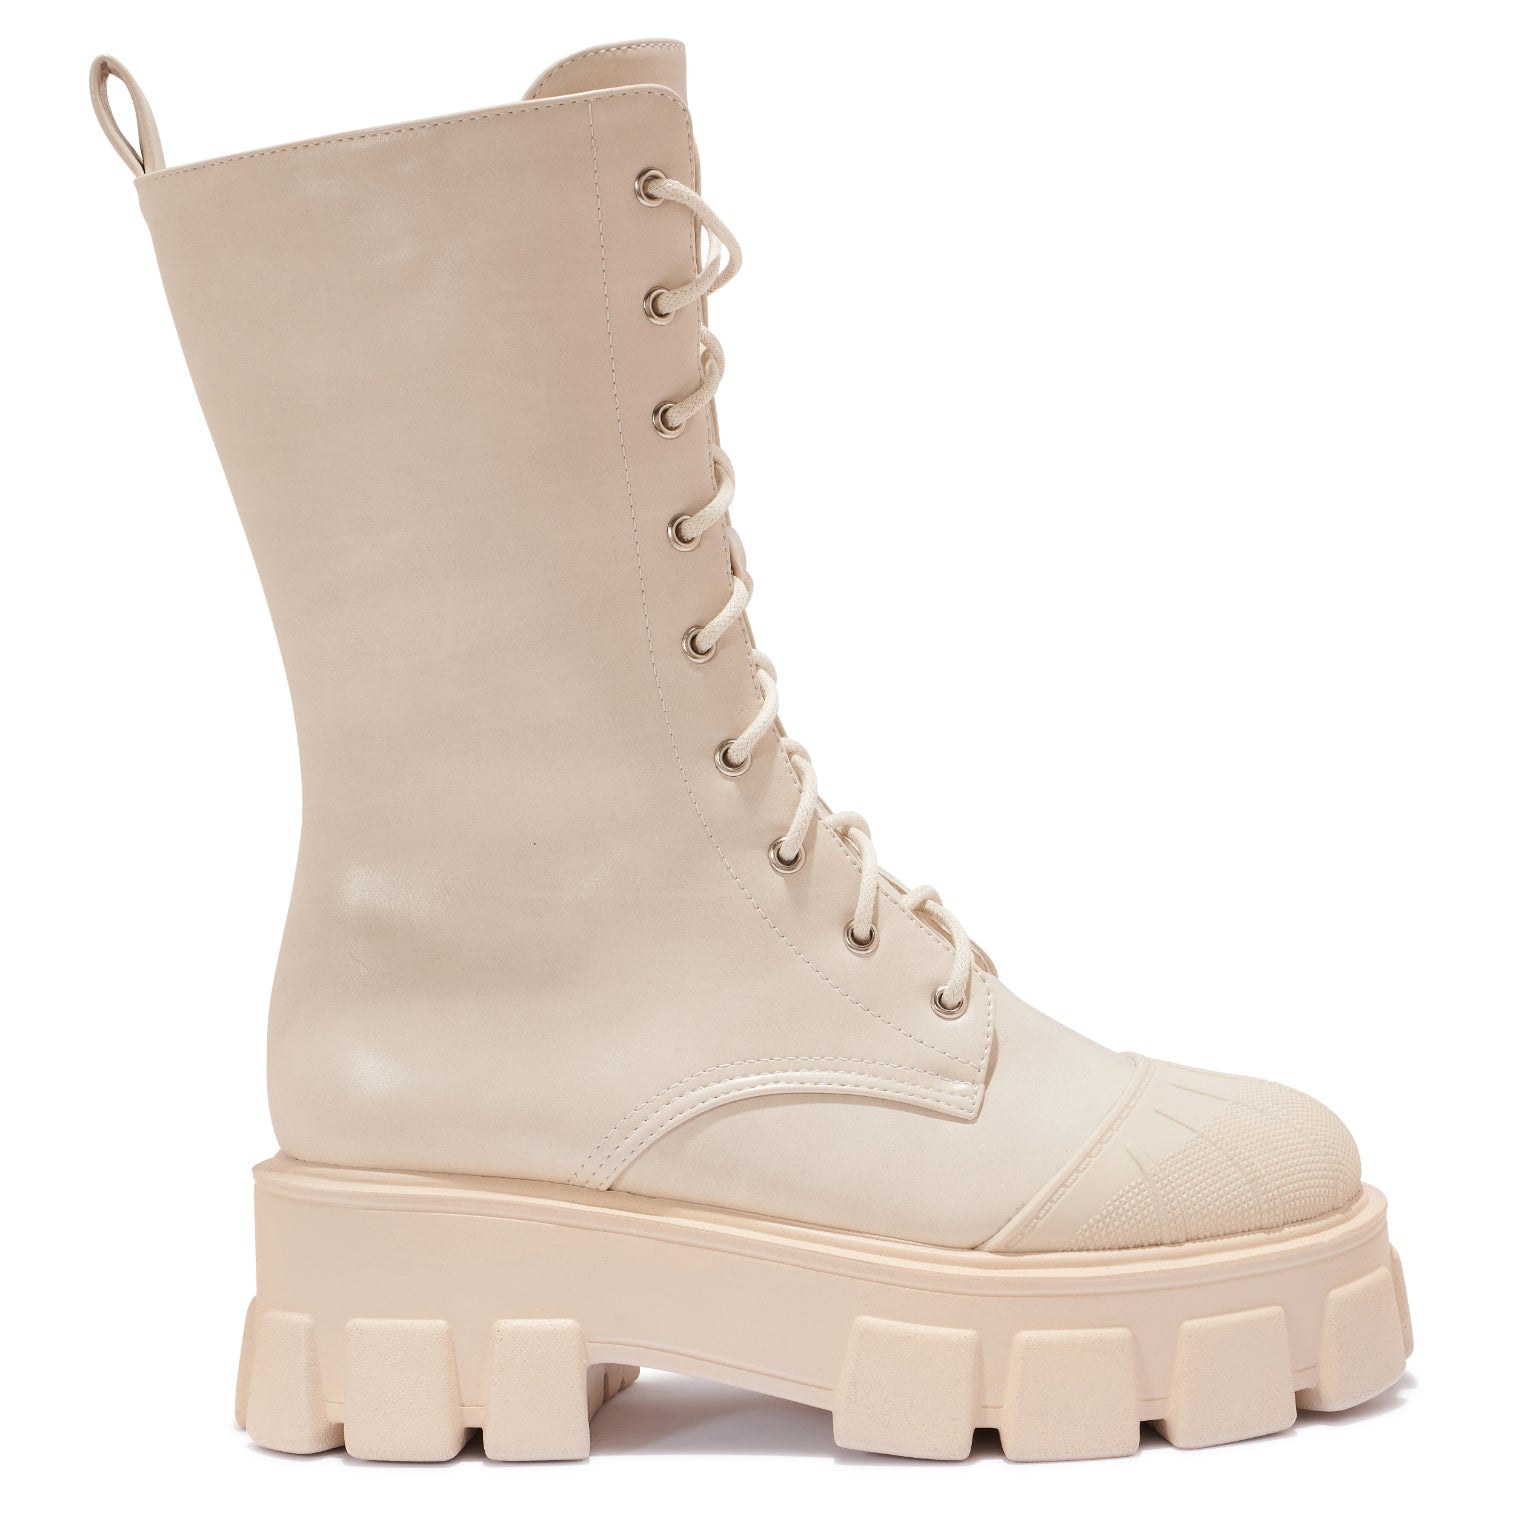 CHAMP3 - EXTREME CHUNKY LACE UP BOOT WITH TOE CAP